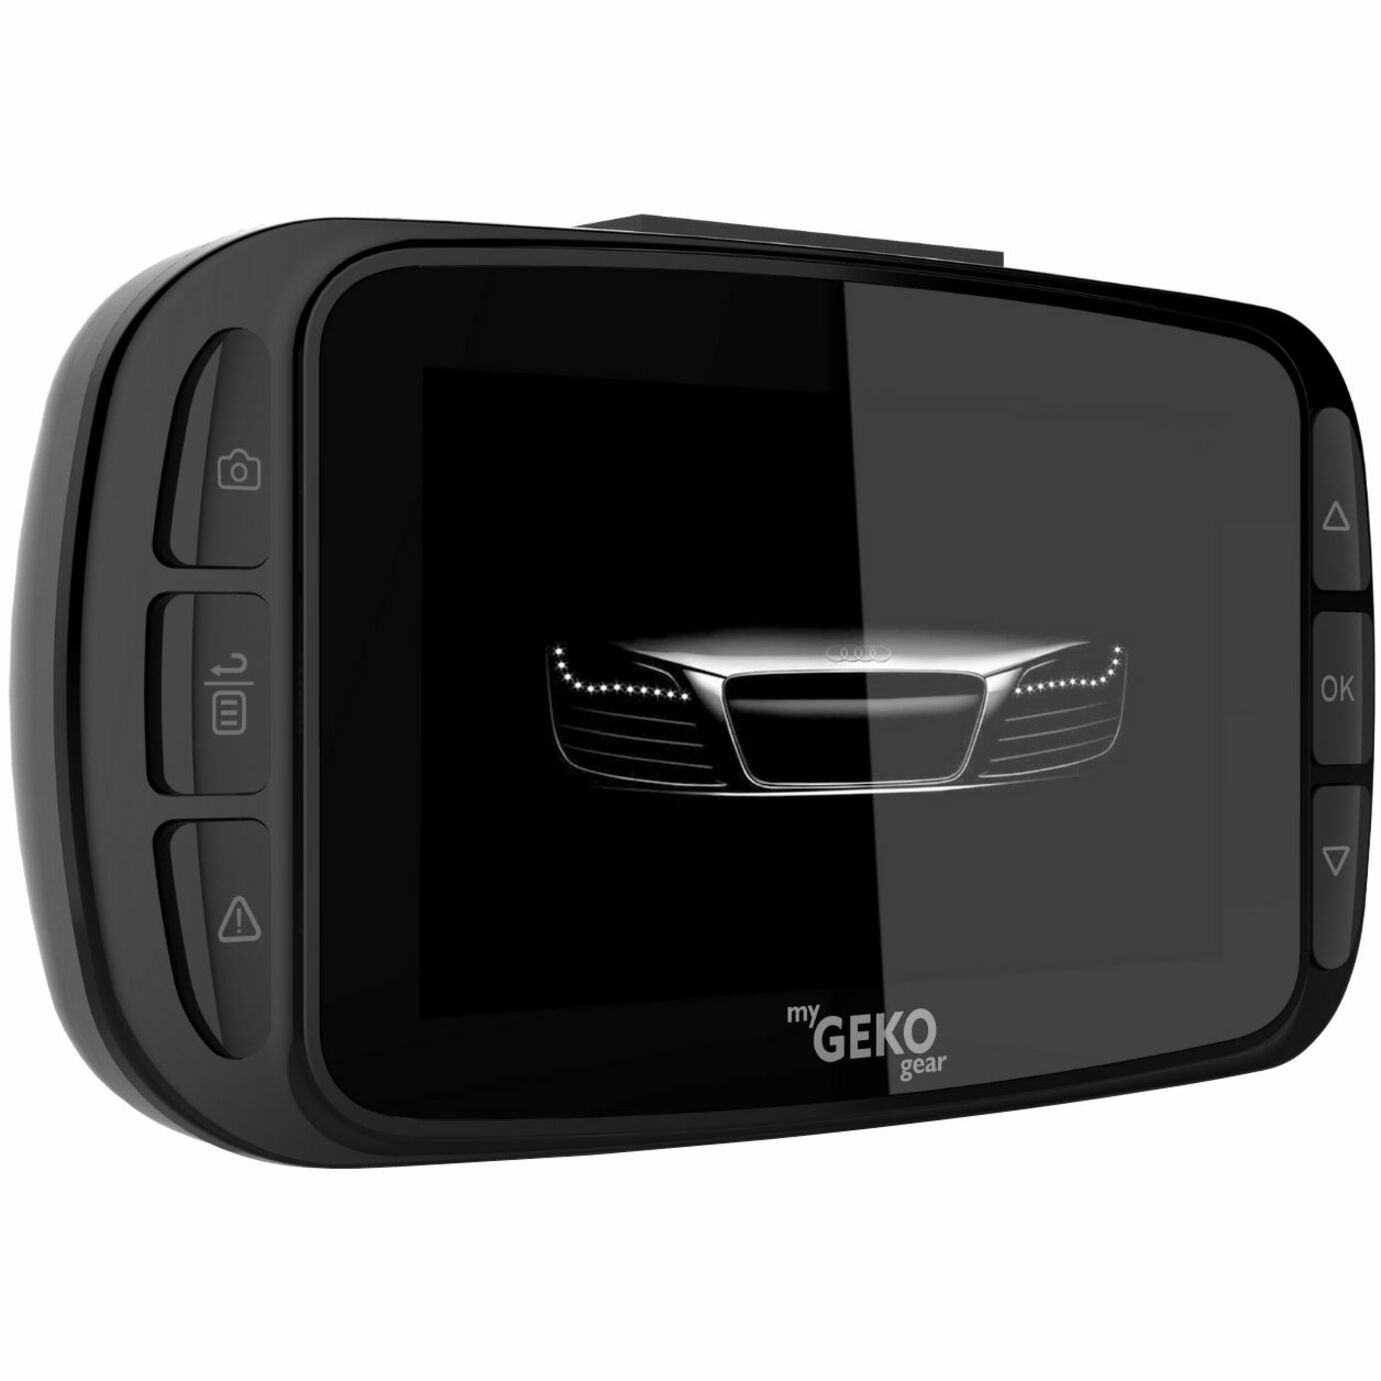 myGEKOgear GO96016G Orbit 960 Vehicle Camera, 4K UHD Dash Cam with Instant Video Access, GPS Logging, Wide Angle View, and Night Vision